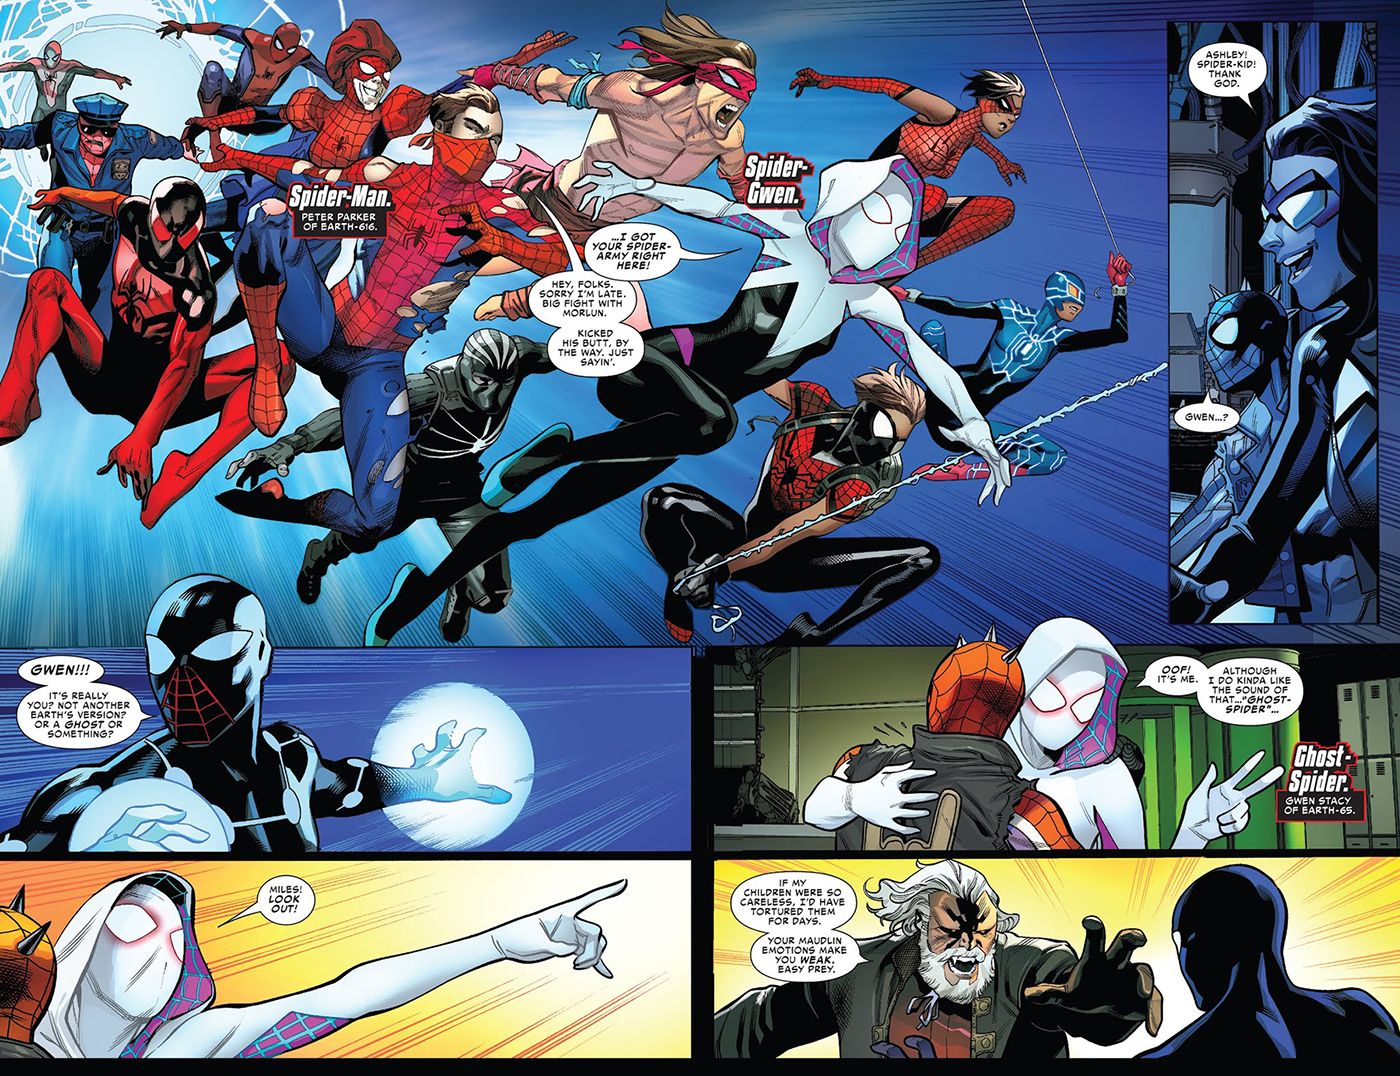 Spider-Geddon #5 two-page spread of Gwen Stacy arriving with an army including Peter Parker, Spider-Ma'am, and Spider-Cop. She hugs Spider-Punk and warns Miles to look out